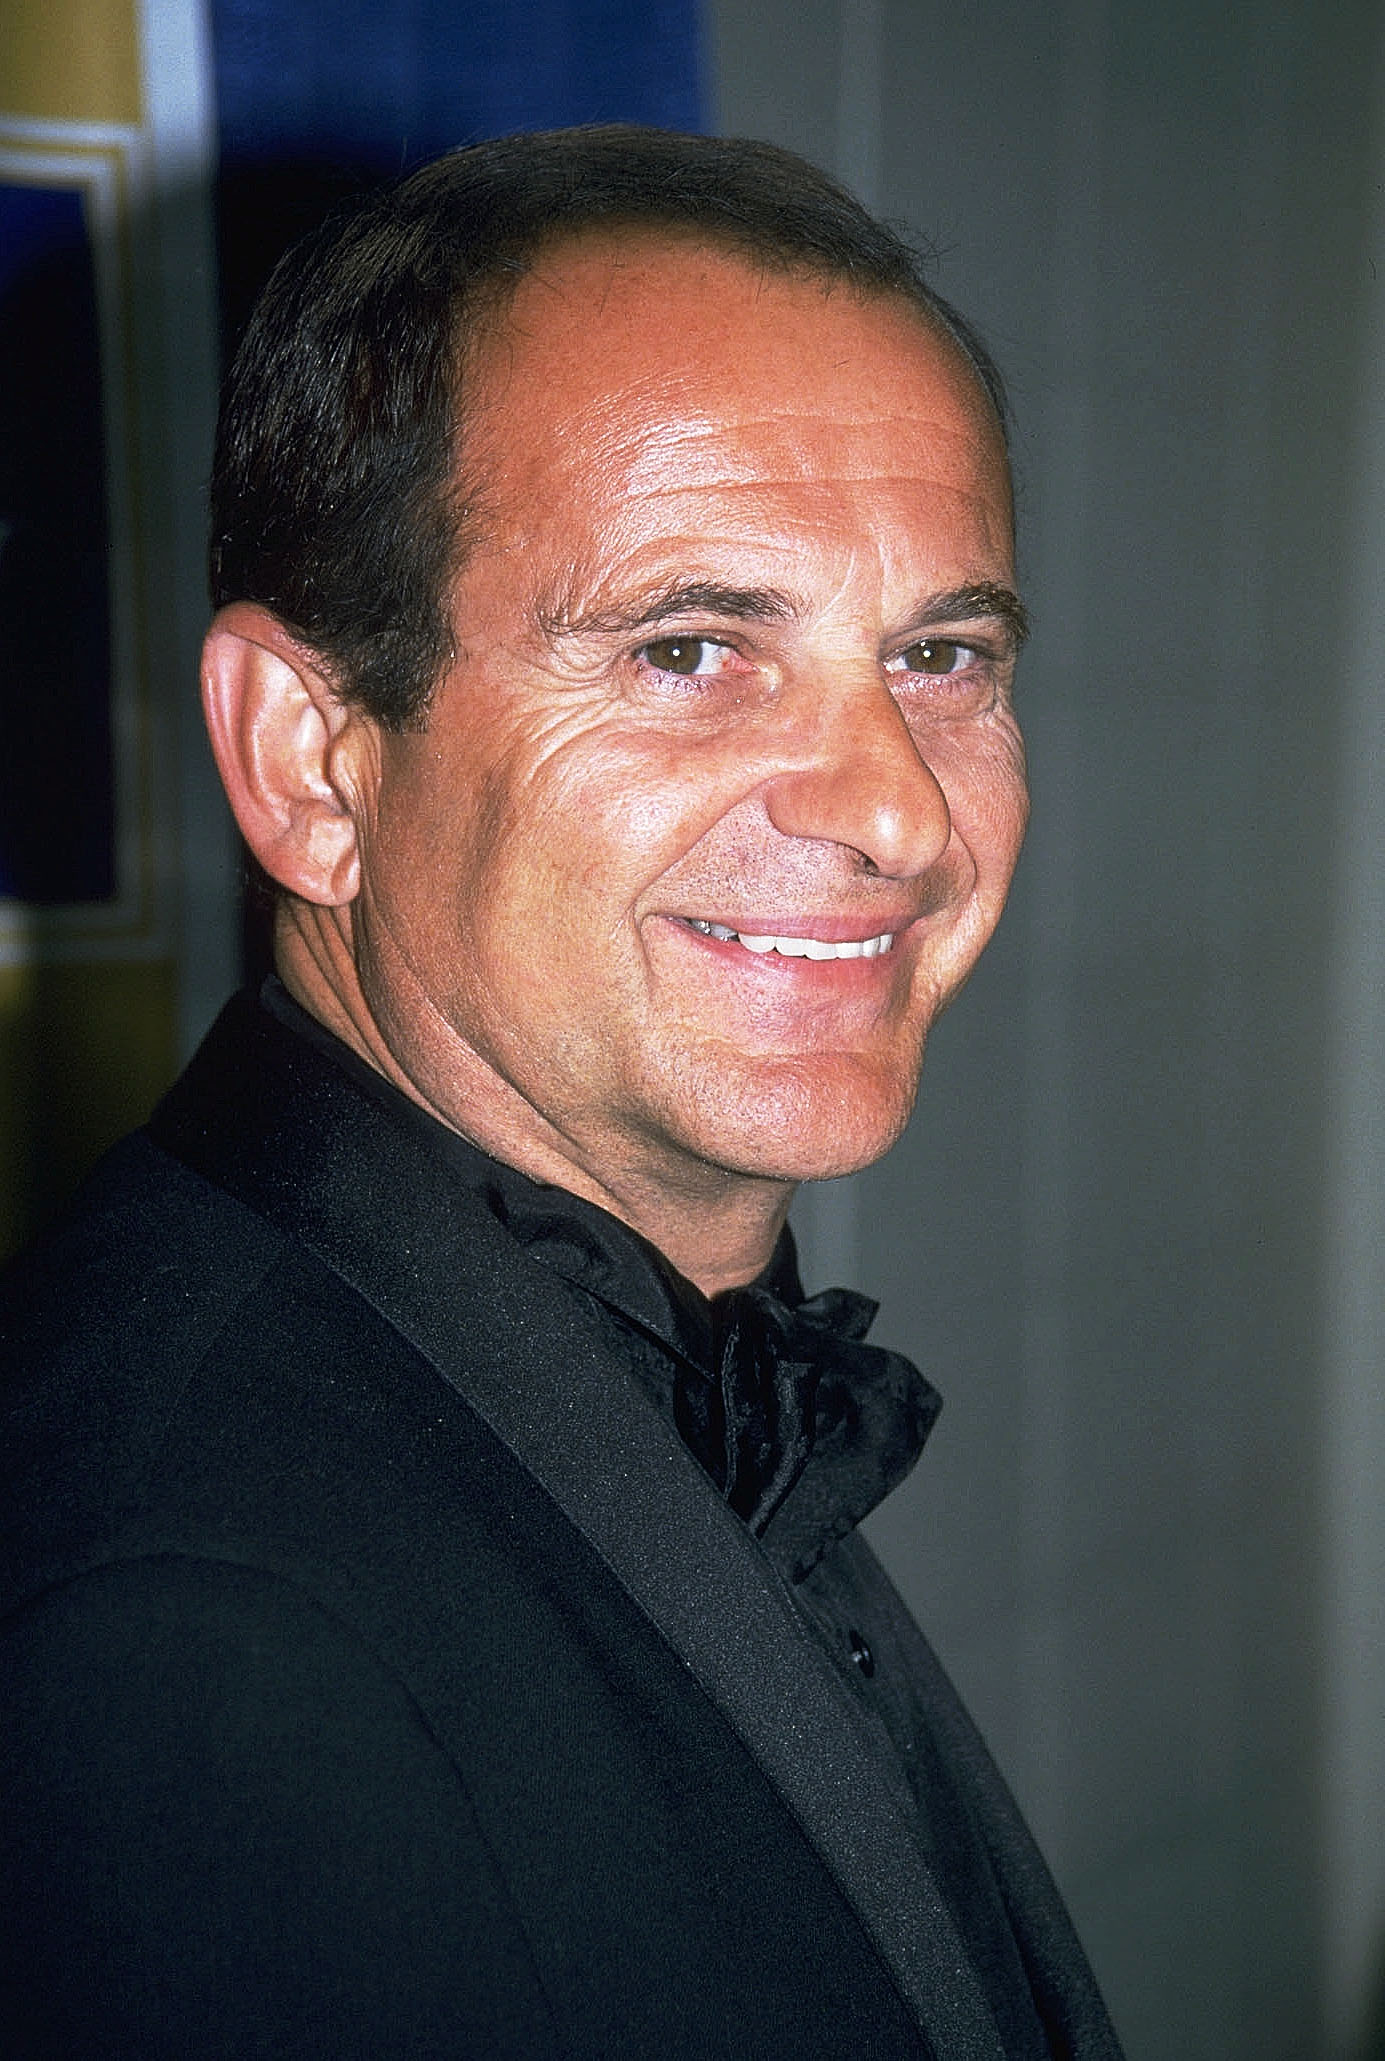 Joe Pesci (Photo by Newsmakers via Getty Images)